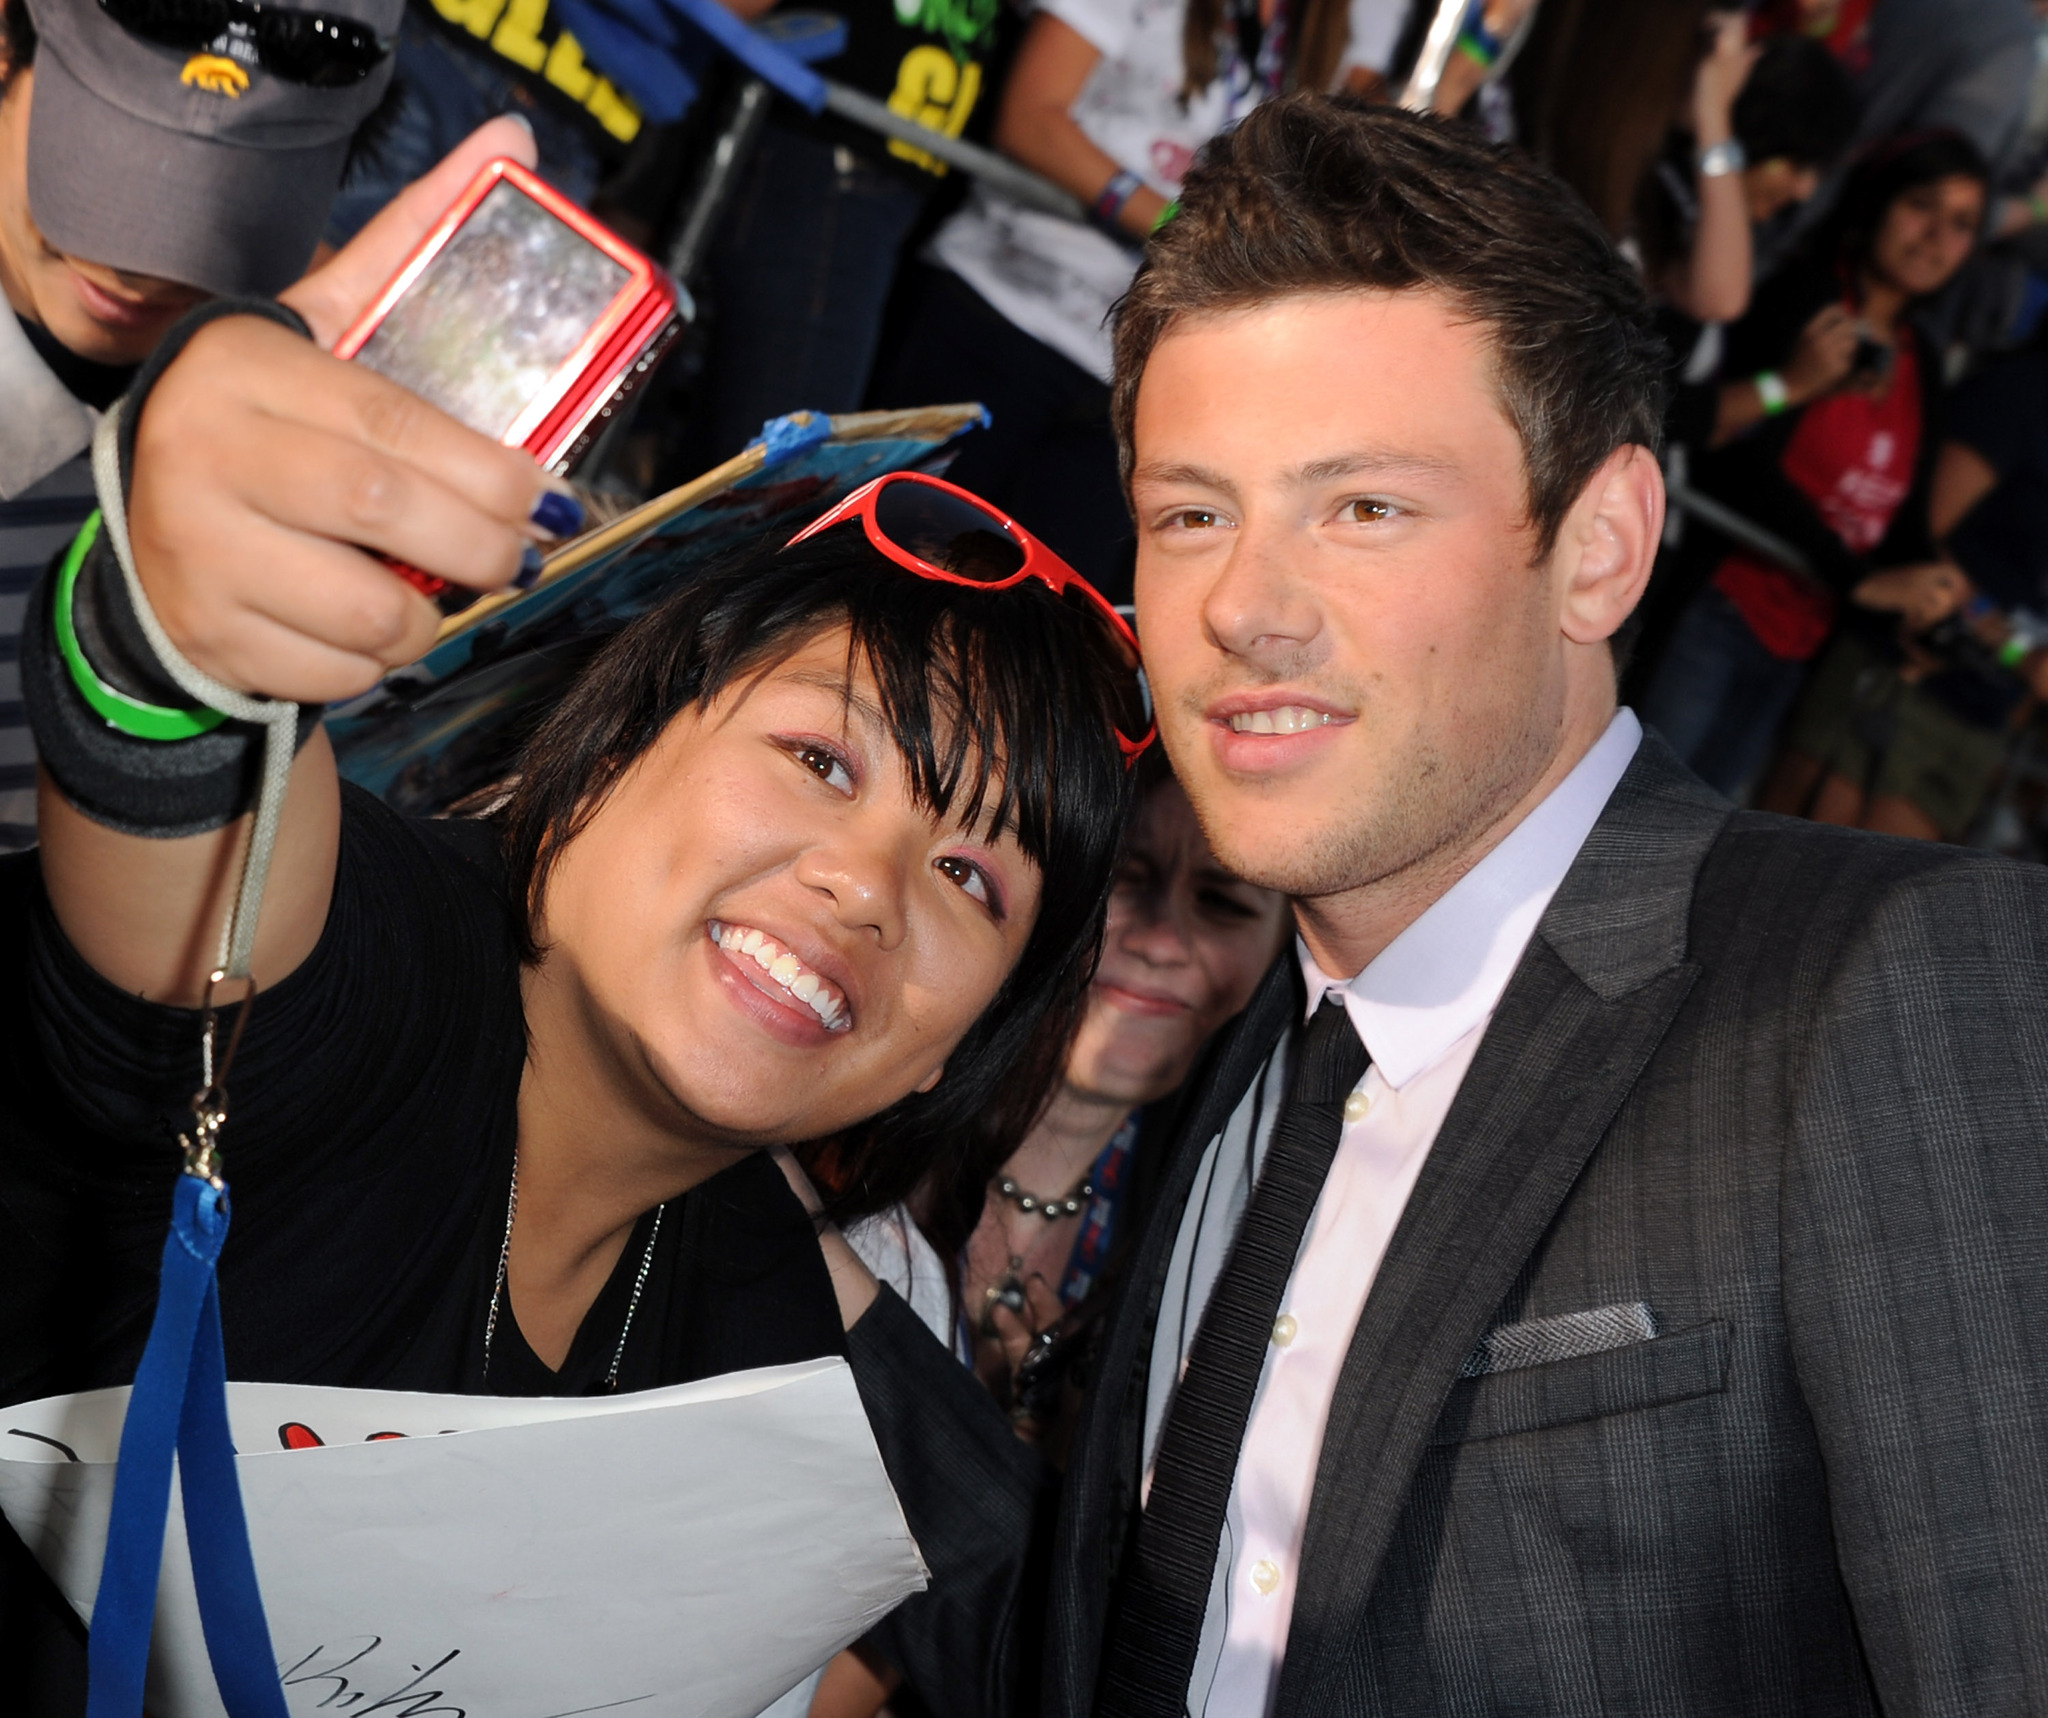 Cory Monteith at event of Glee: The 3D Concert Movie (2011)